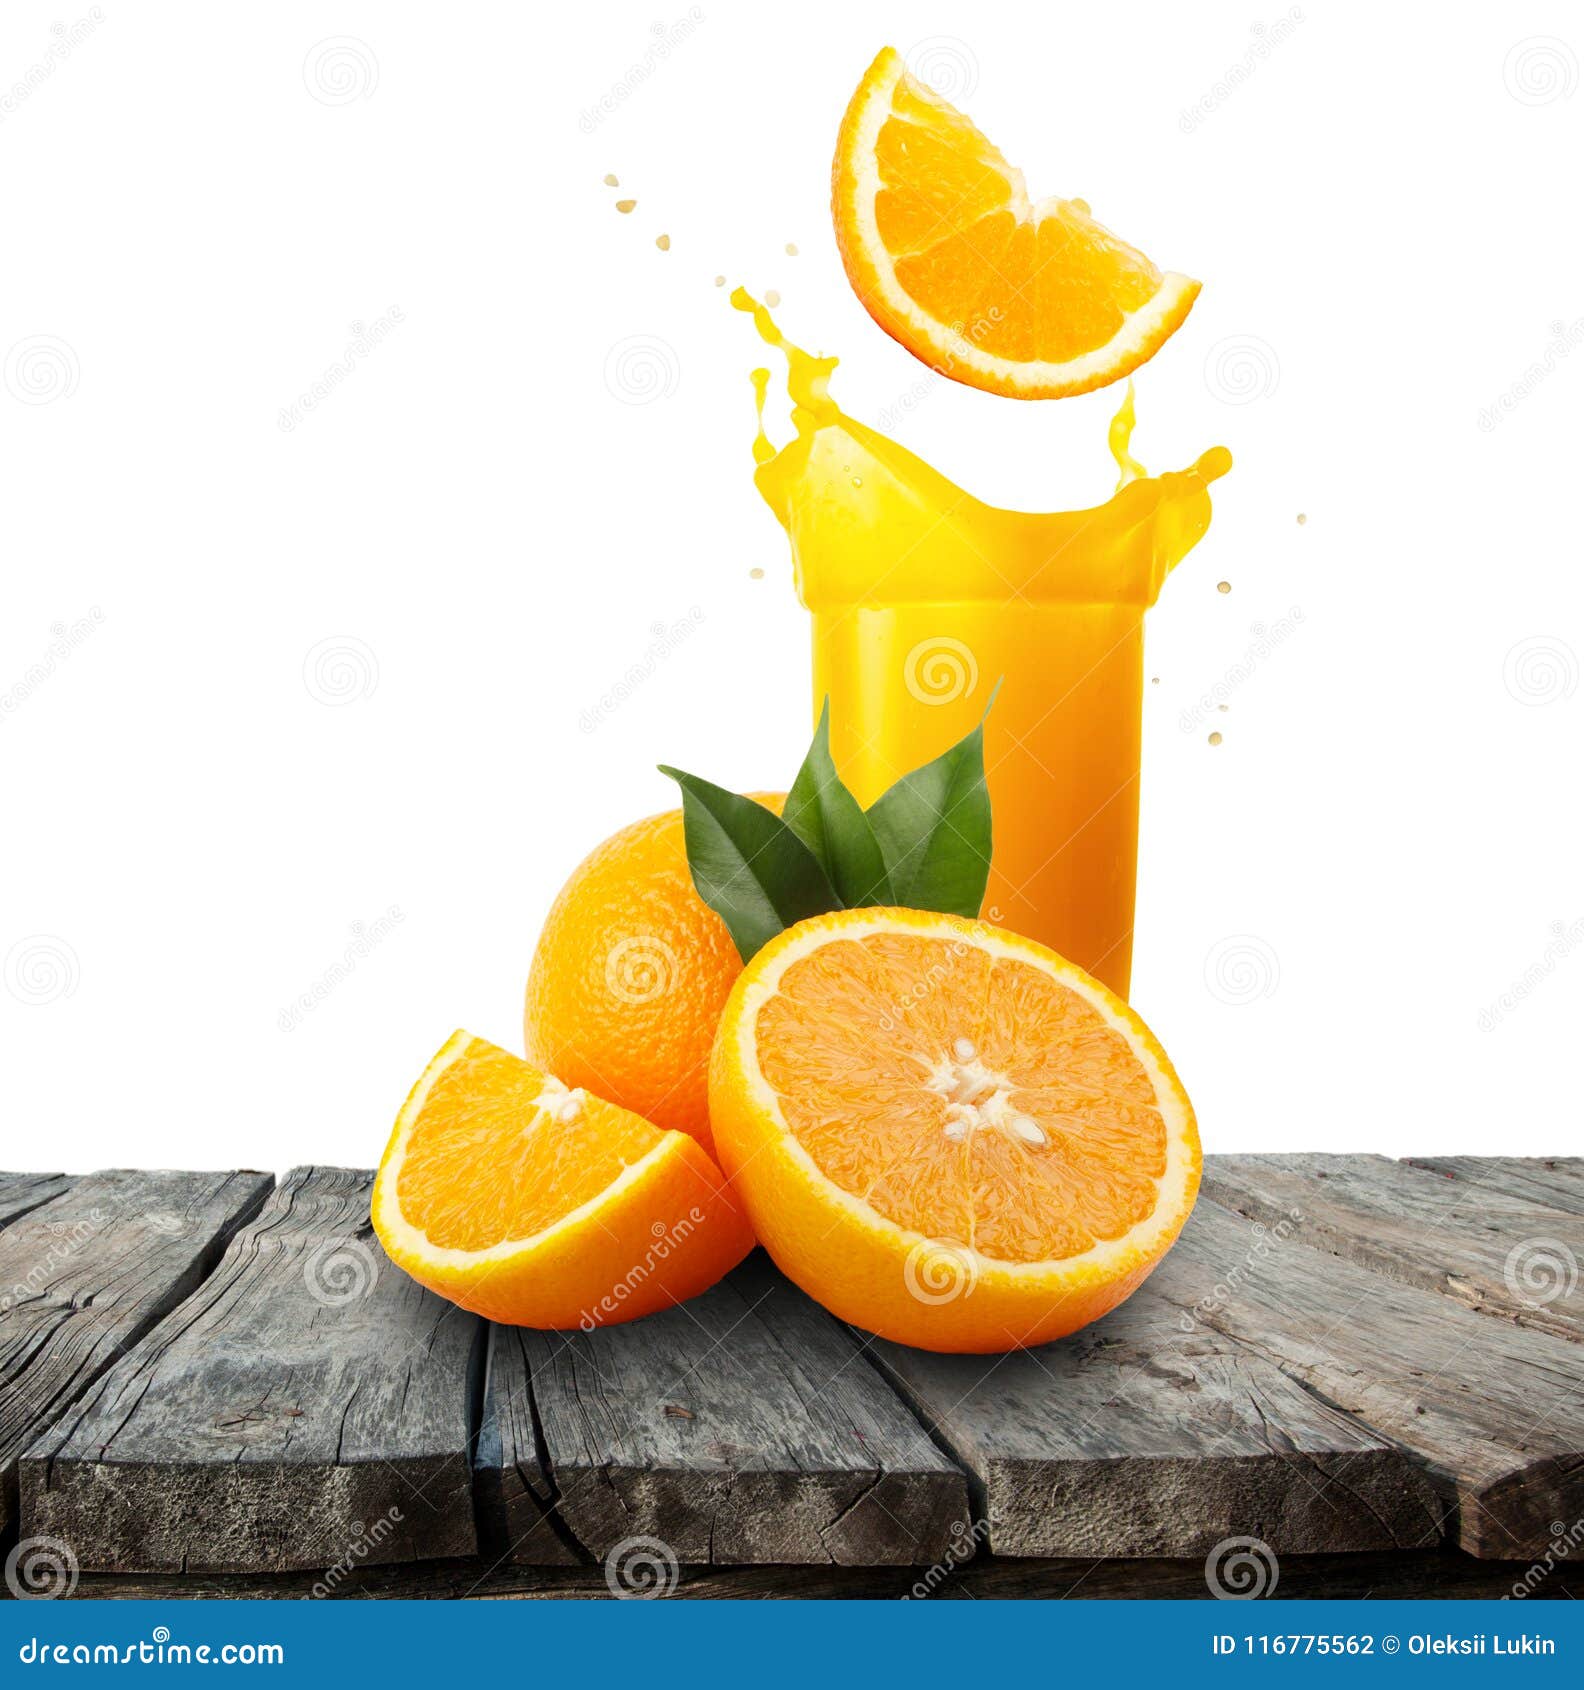 Juice In Glass Jar And Orange On Kitchen Table. Stock Photo, Picture and  Royalty Free Image. Image 14167034.